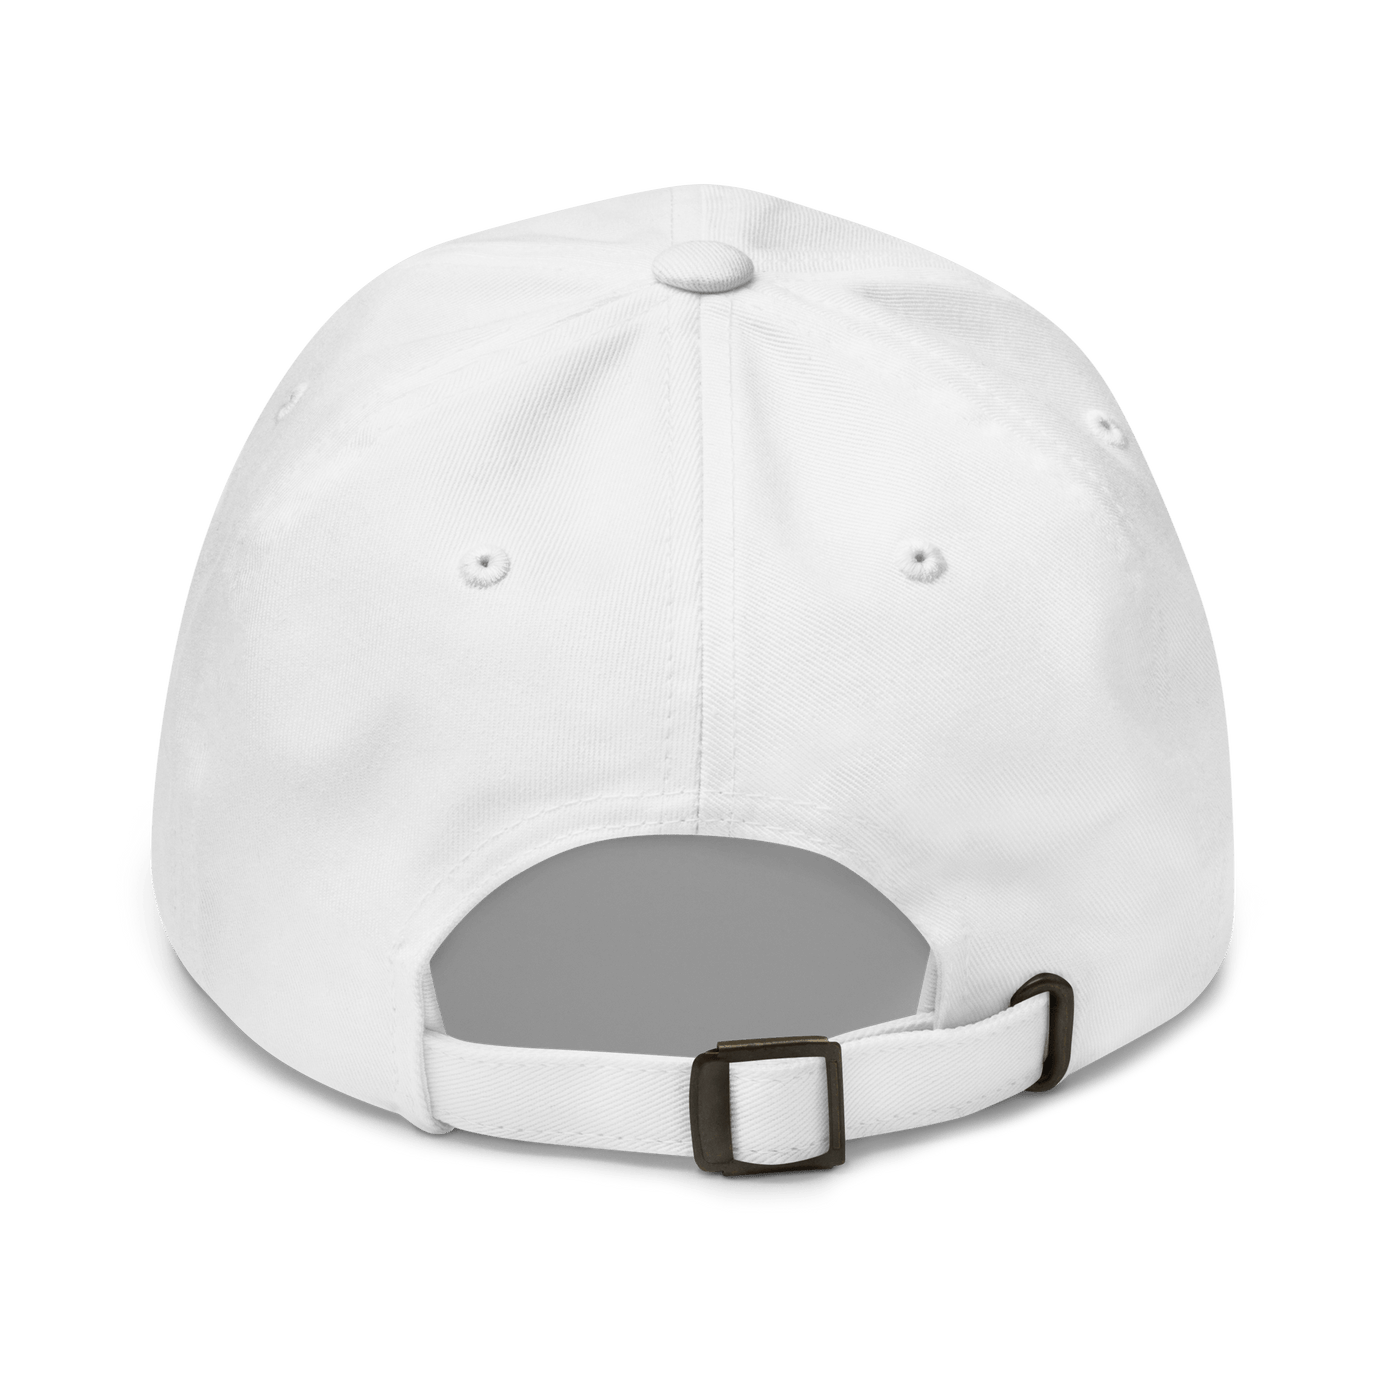 Dad hat - White - - Just Another Cap Store